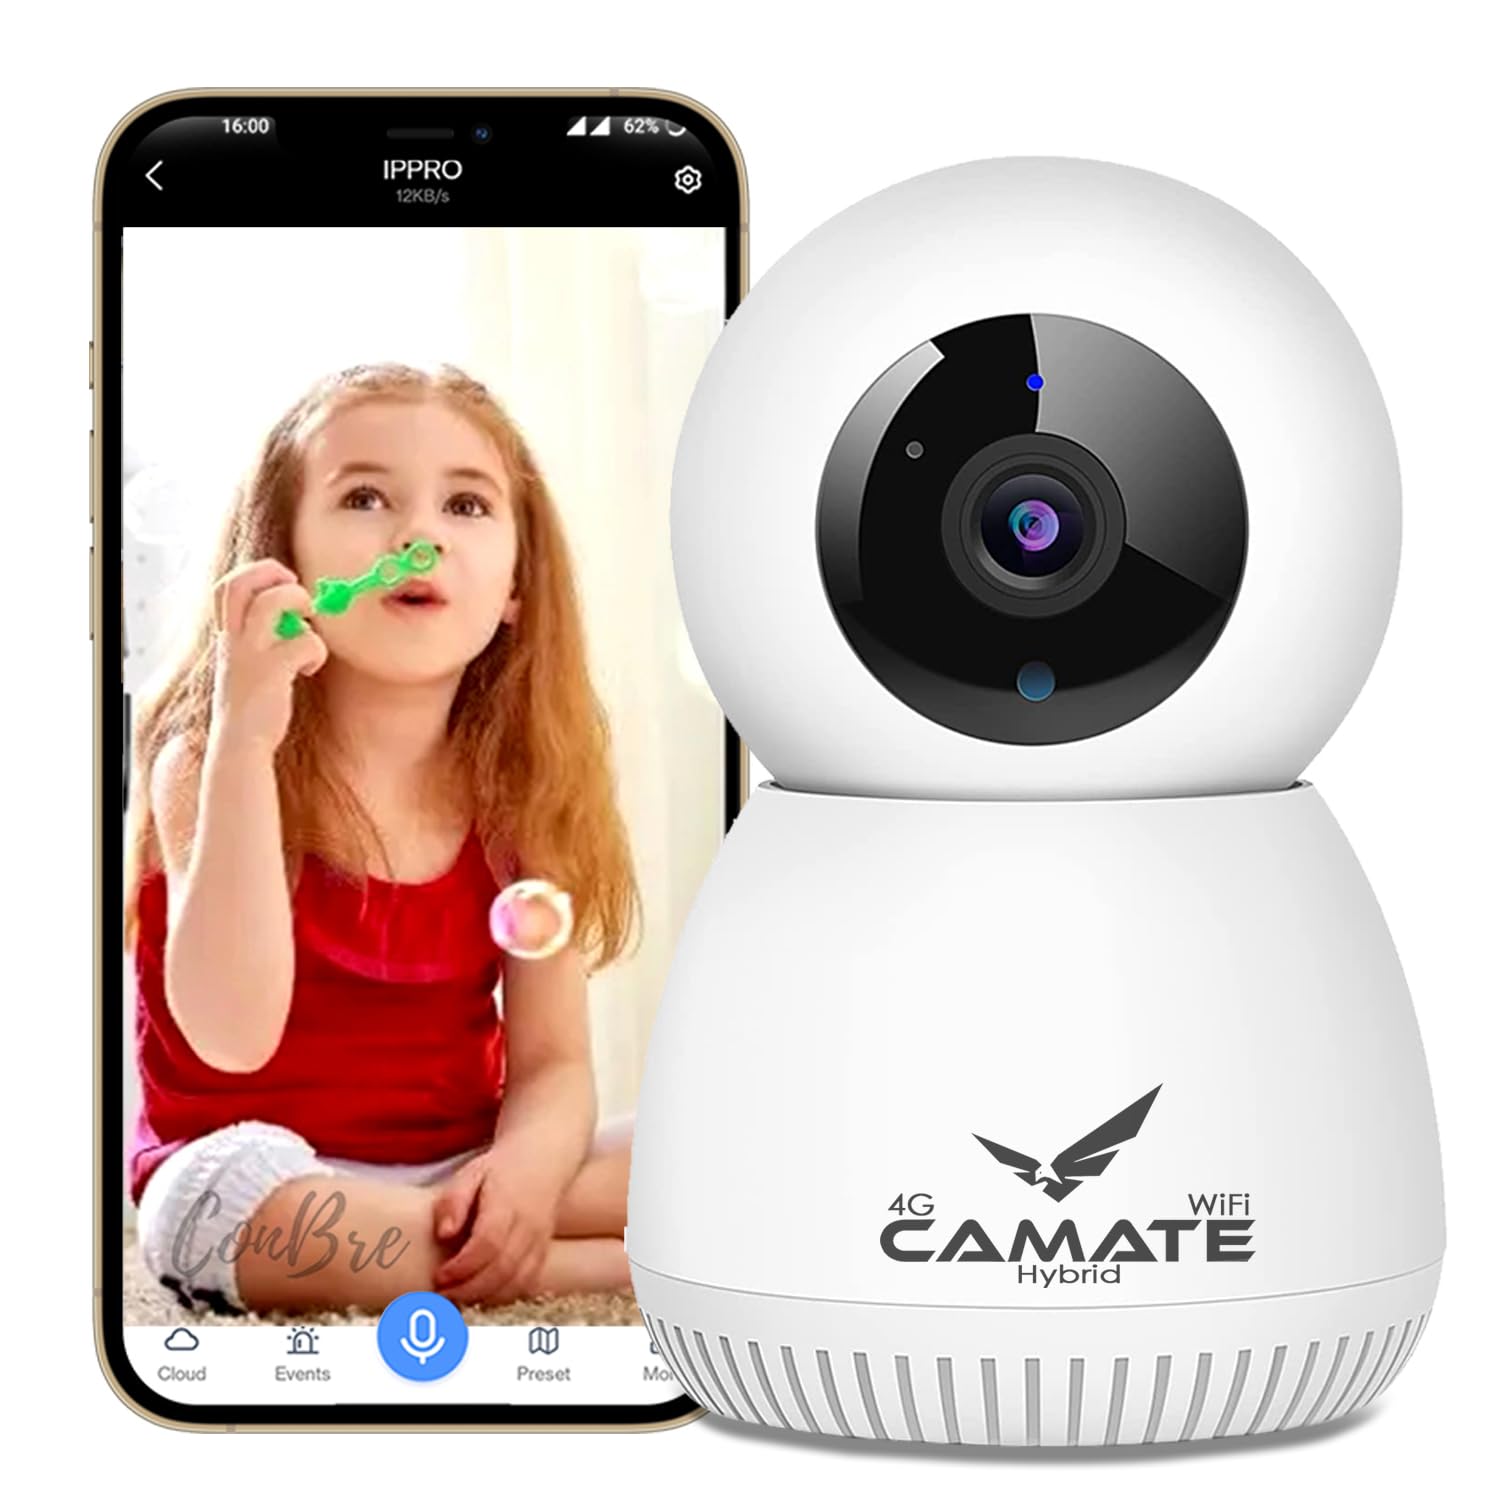 Camate Hybrid 4G Sim + Wi Fi Based 3MP Indoor CCTV Camera | Baby Monitoring Surveillance |  Motion Detection & Tracking | Support 256GB Micro SD Card